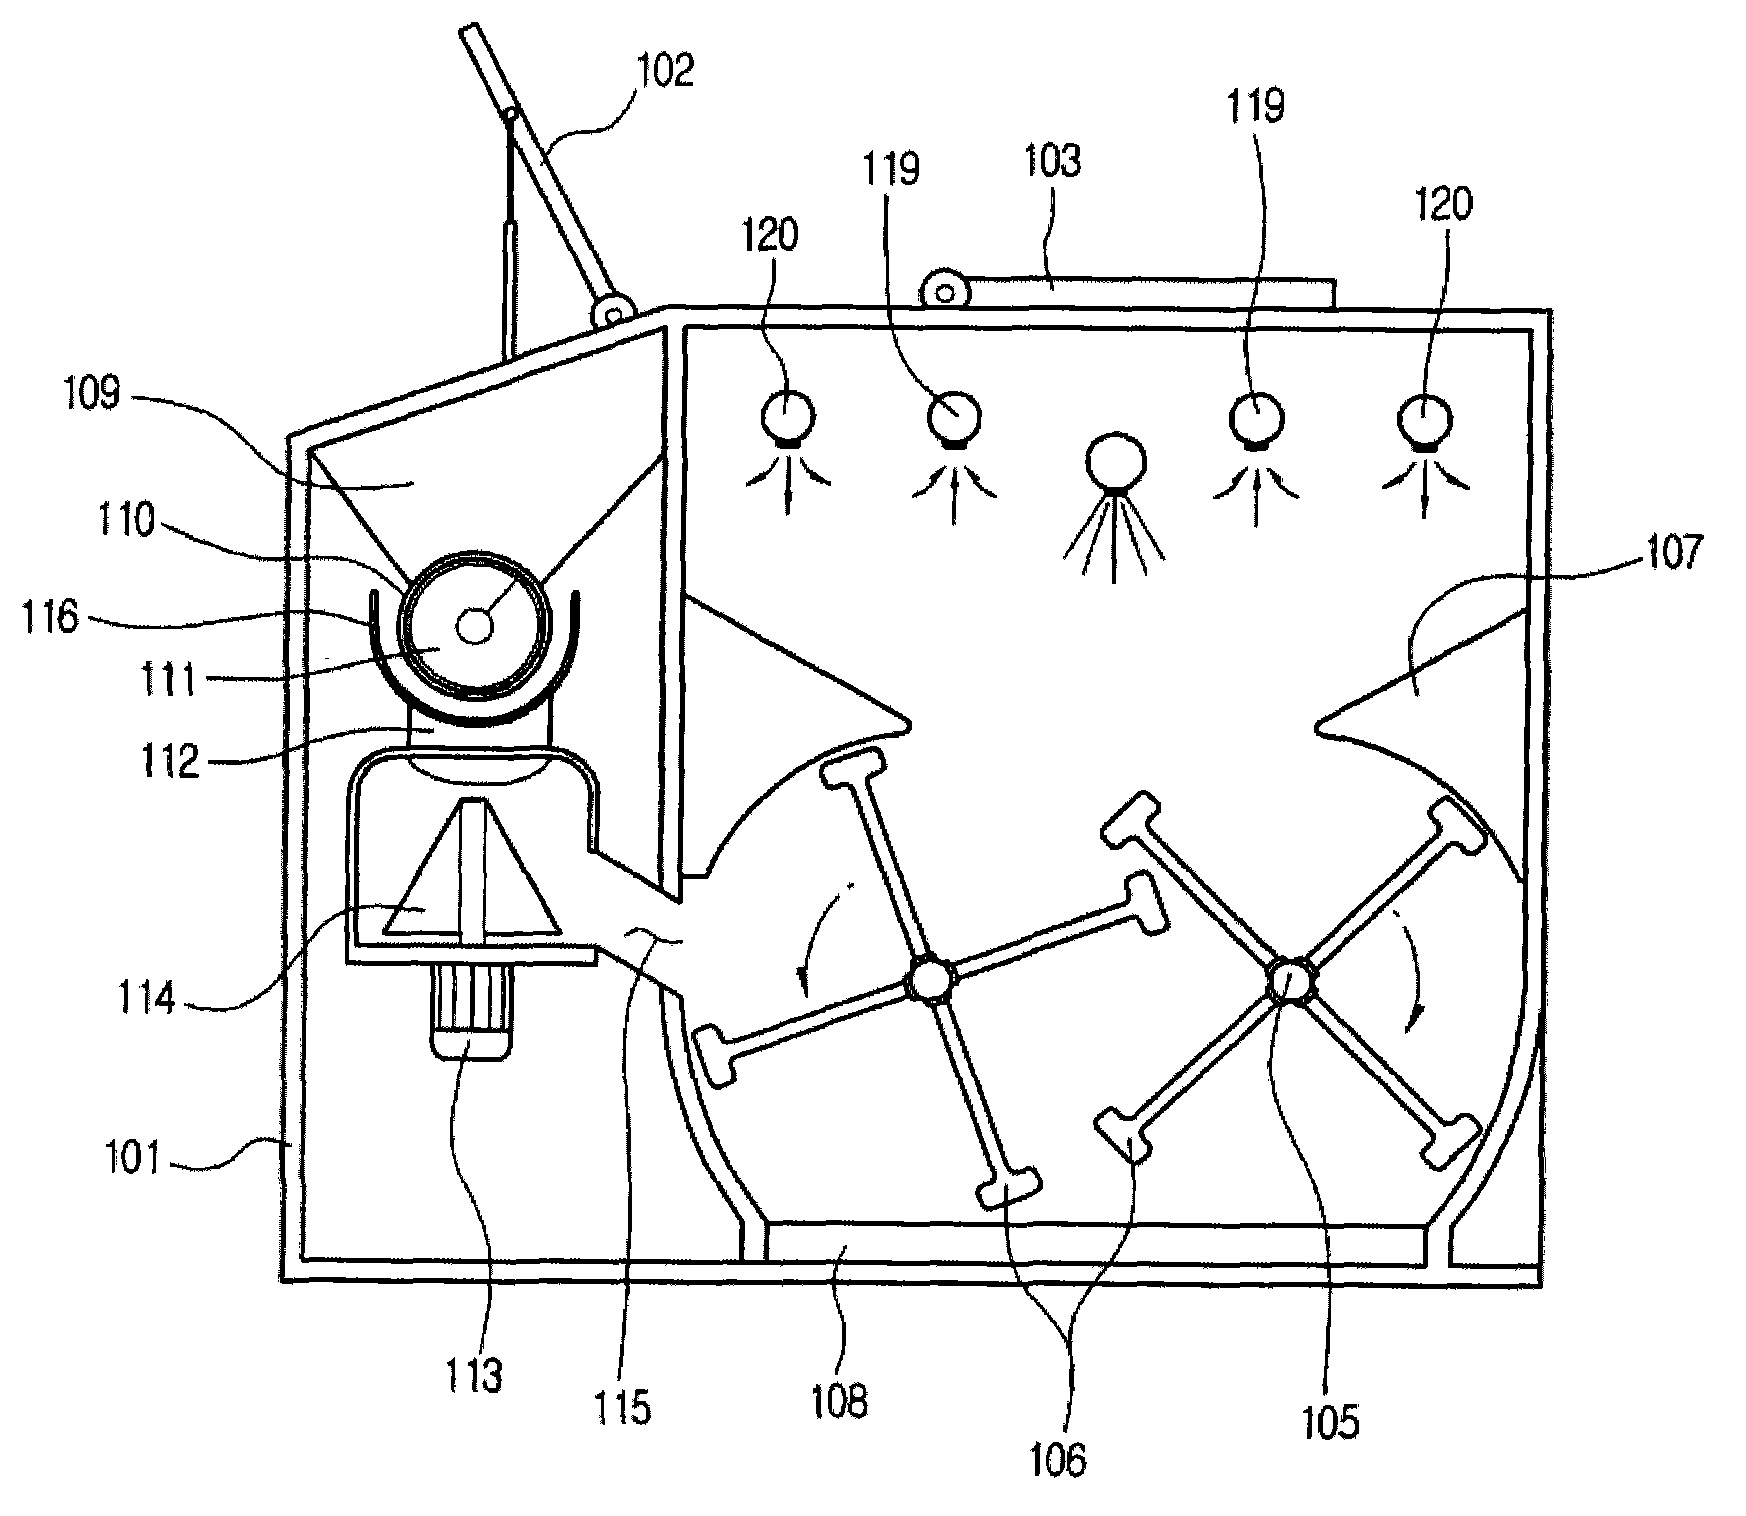 Food waste treatment device